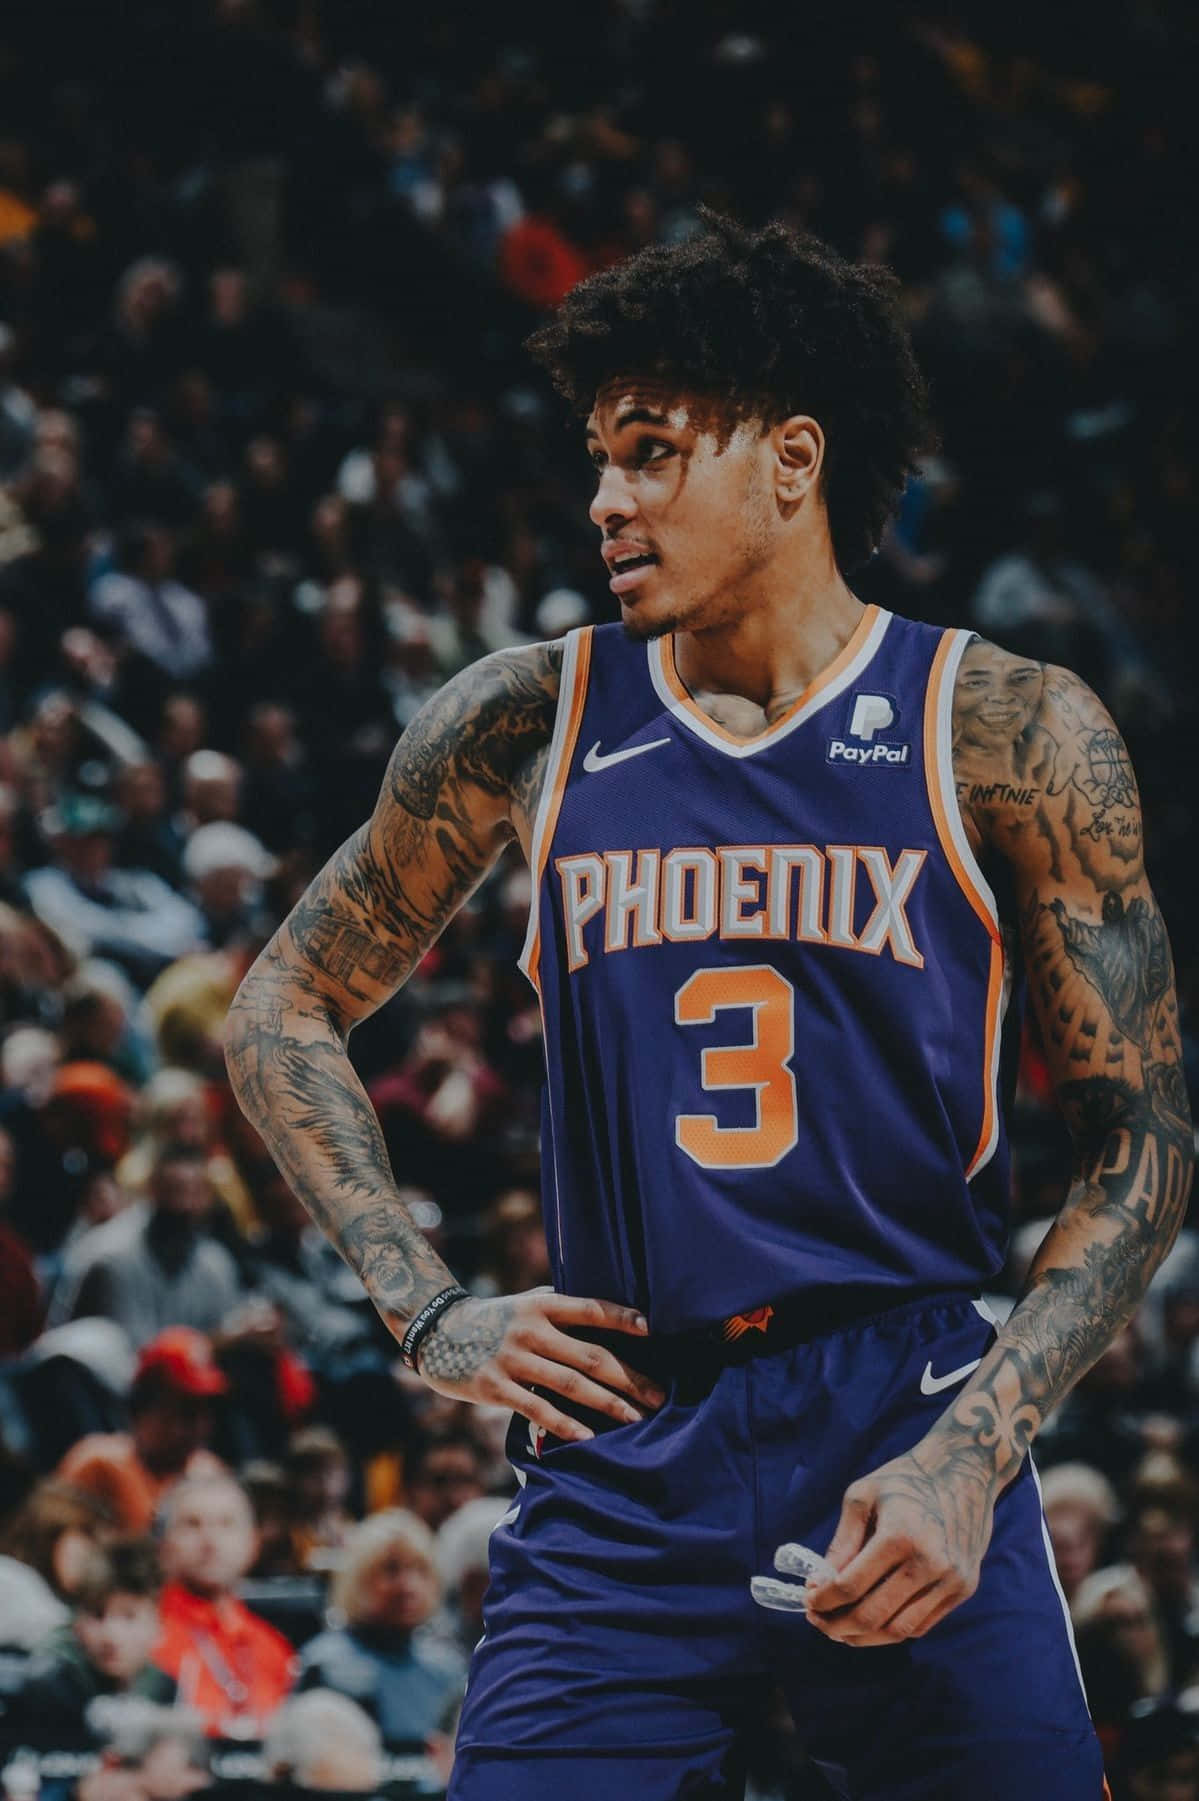 Kelly Oubre Jr of the Golden State Warriors. Wallpaper